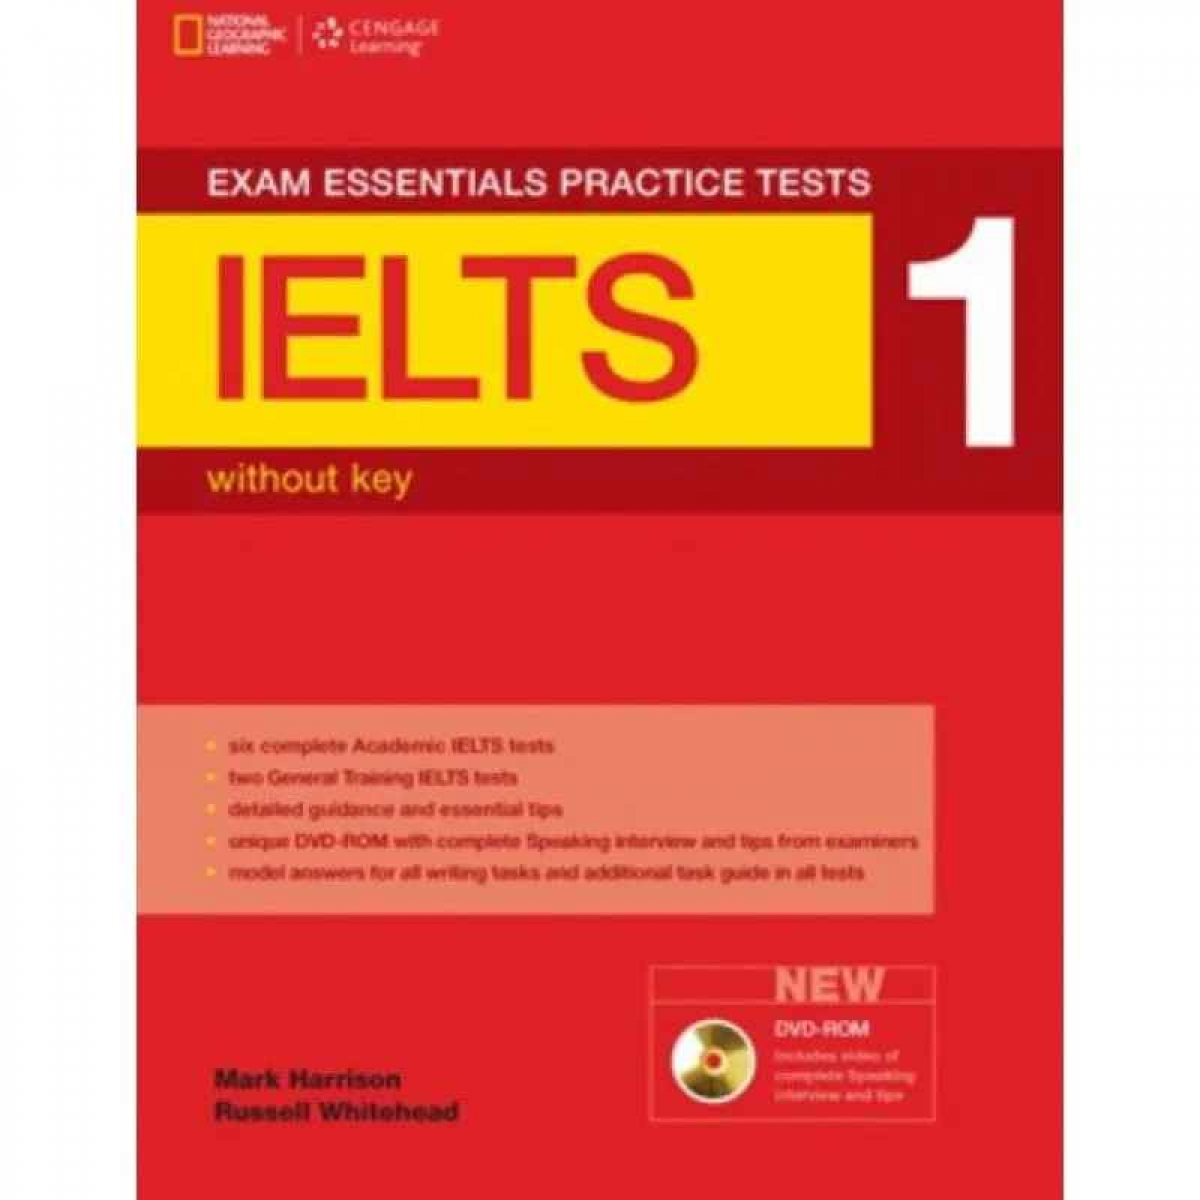 Mark Harrison, Russell Whitehead Exam Essentials IELTS Practice Test 1 without key + DVD - ROM 